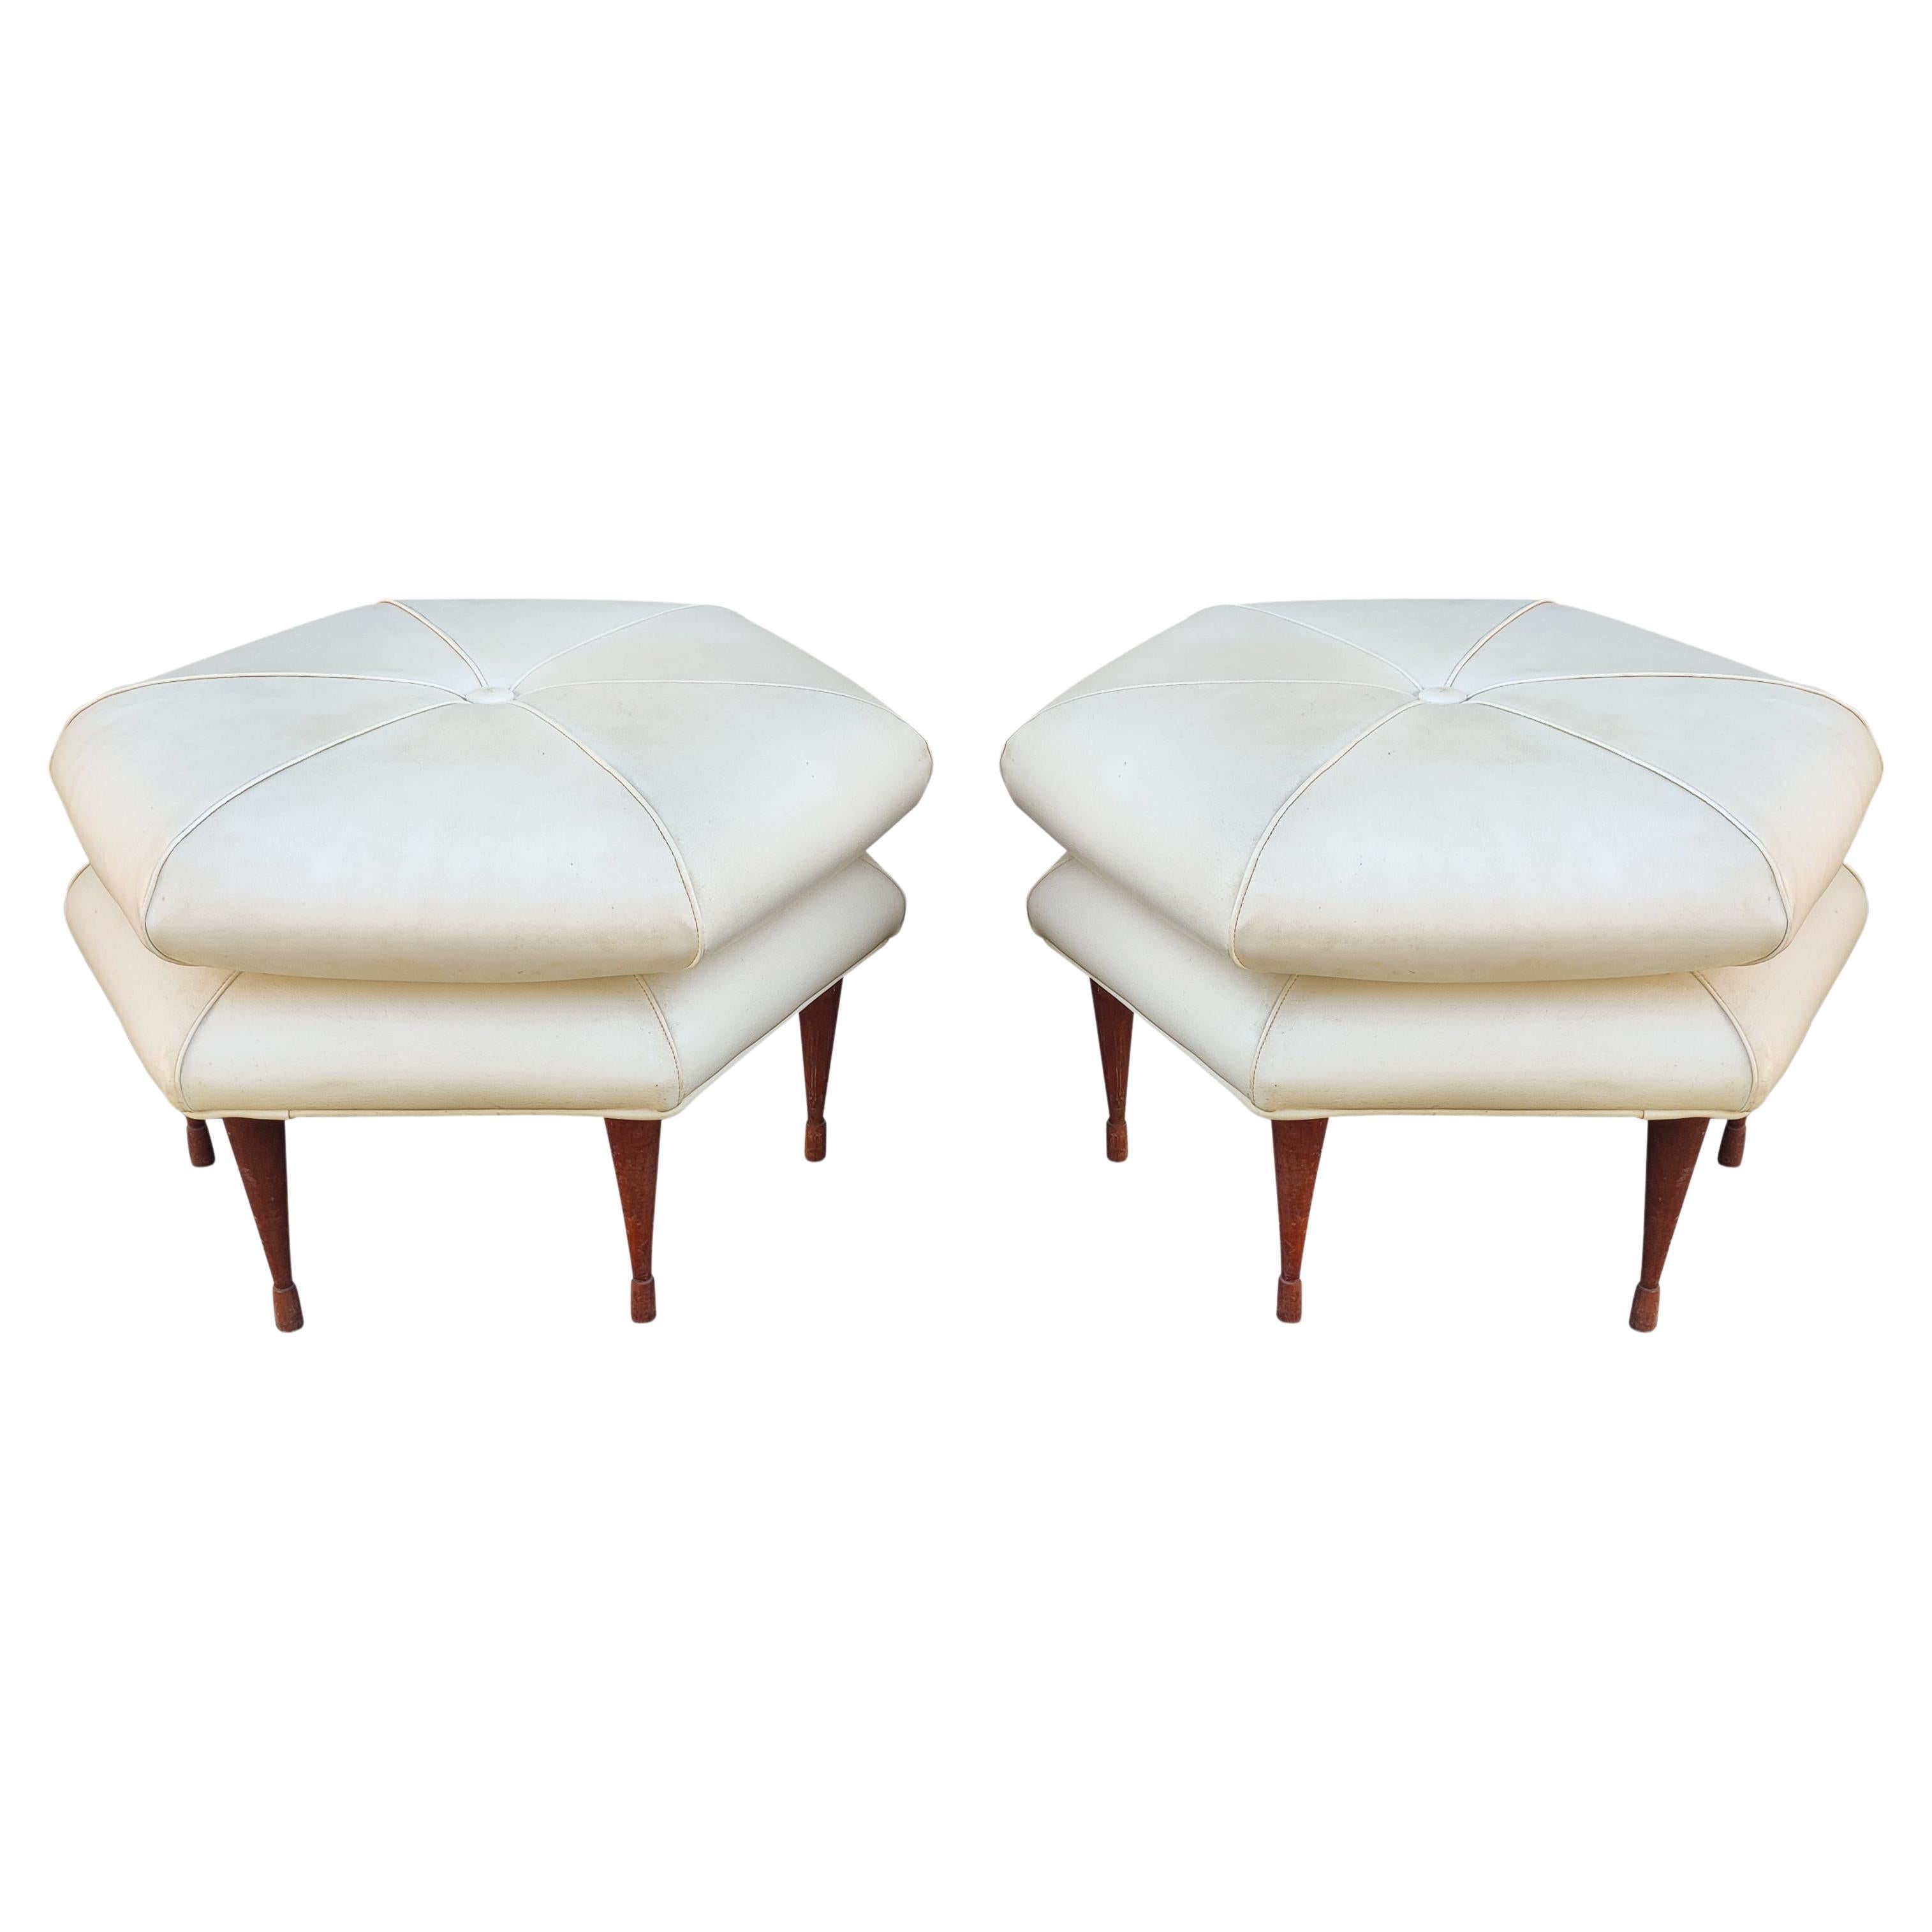 Pair of Selig Hexagon Form Ottoman or Pouffe Original Leatherette on Walnut Legs For Sale